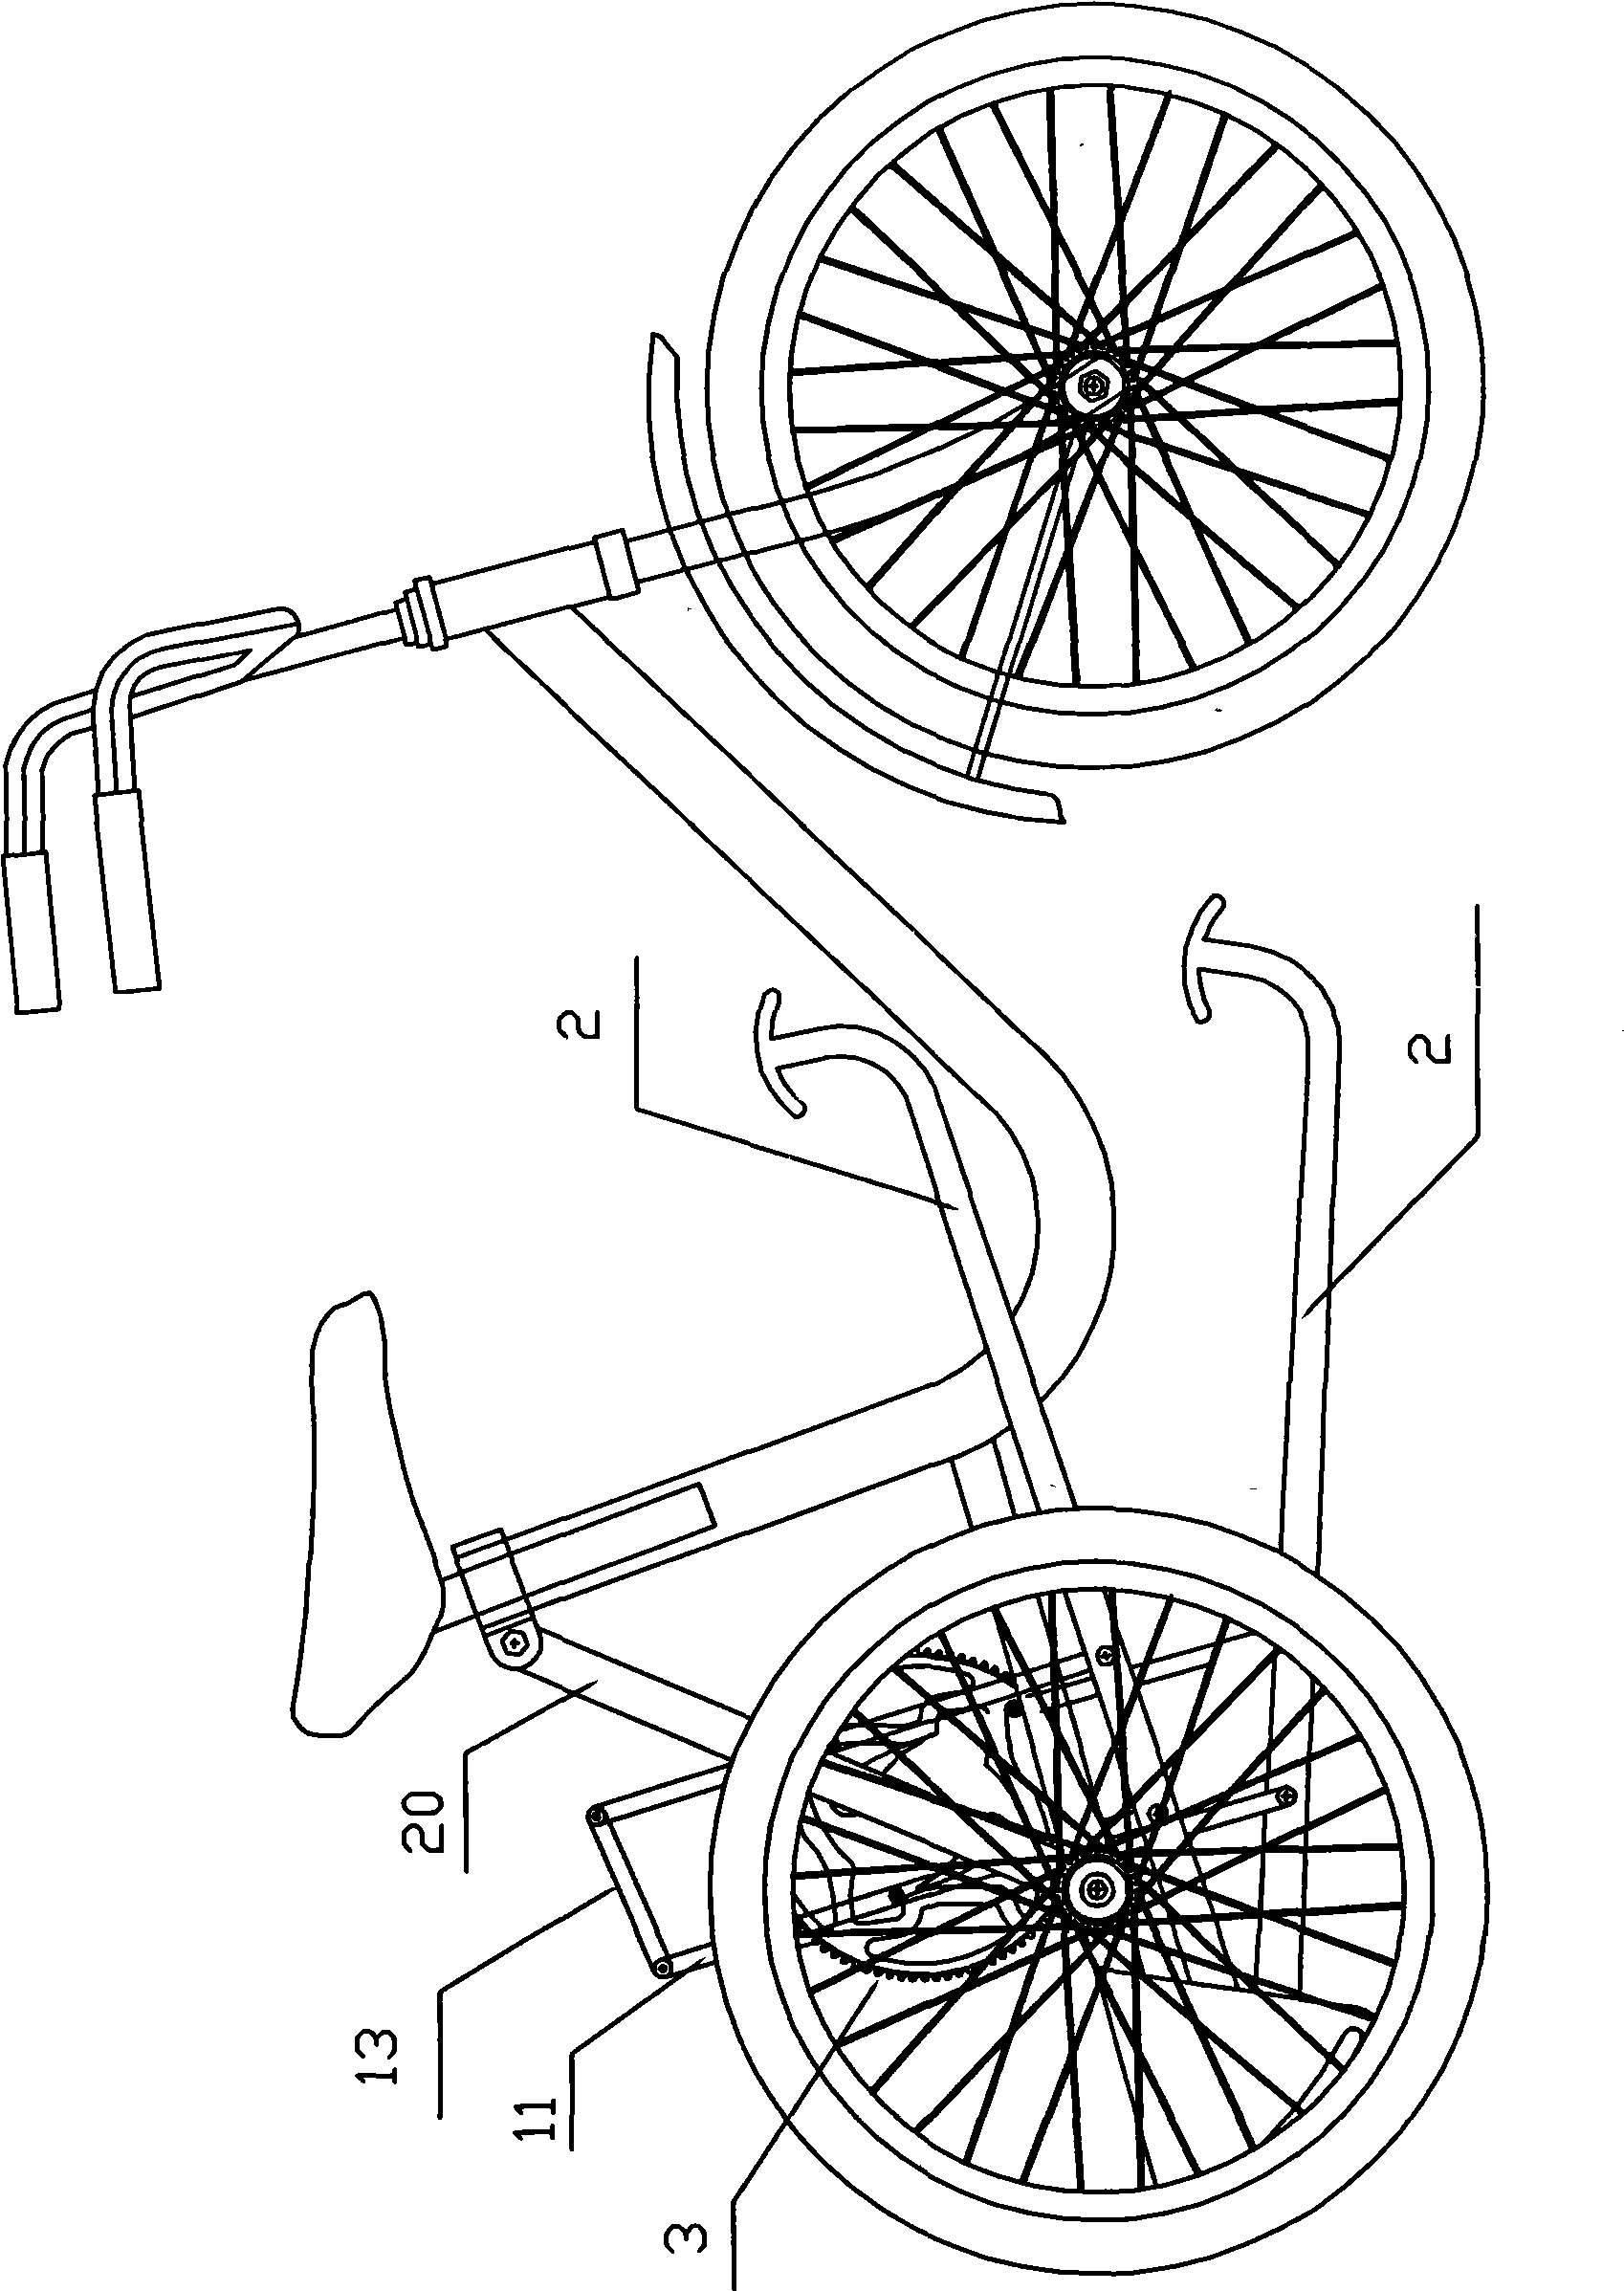 Bicycle with linking lever and cam